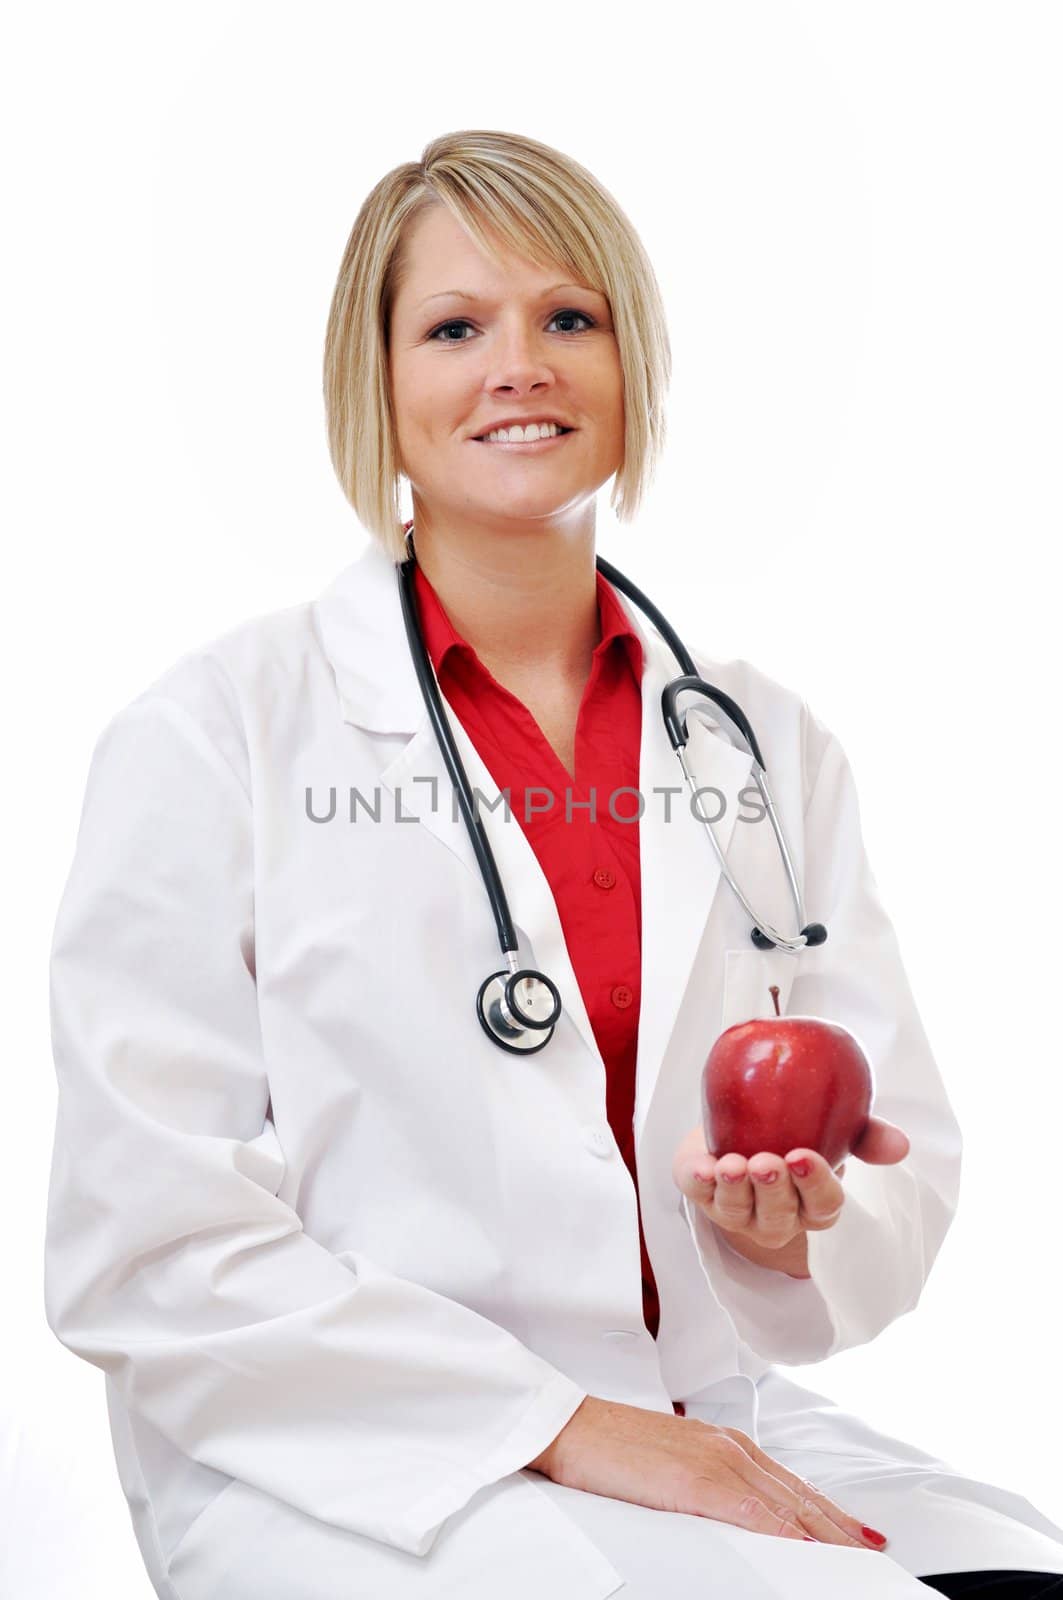 Female Doctor with Apple and Stethoscope Isolated by dehooks